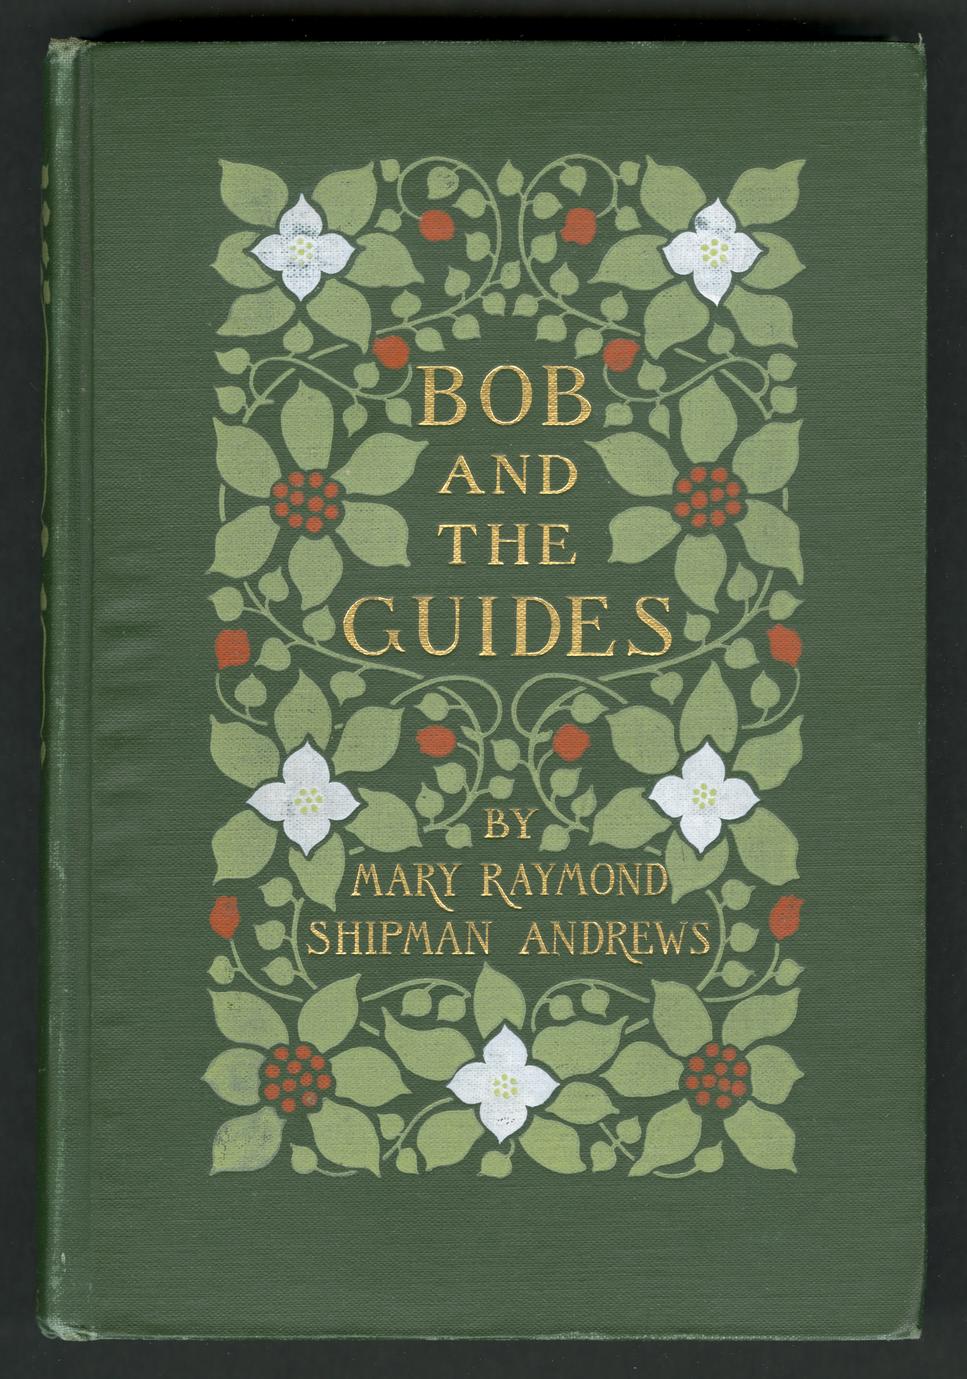 Bob and the guides (1 of 2)